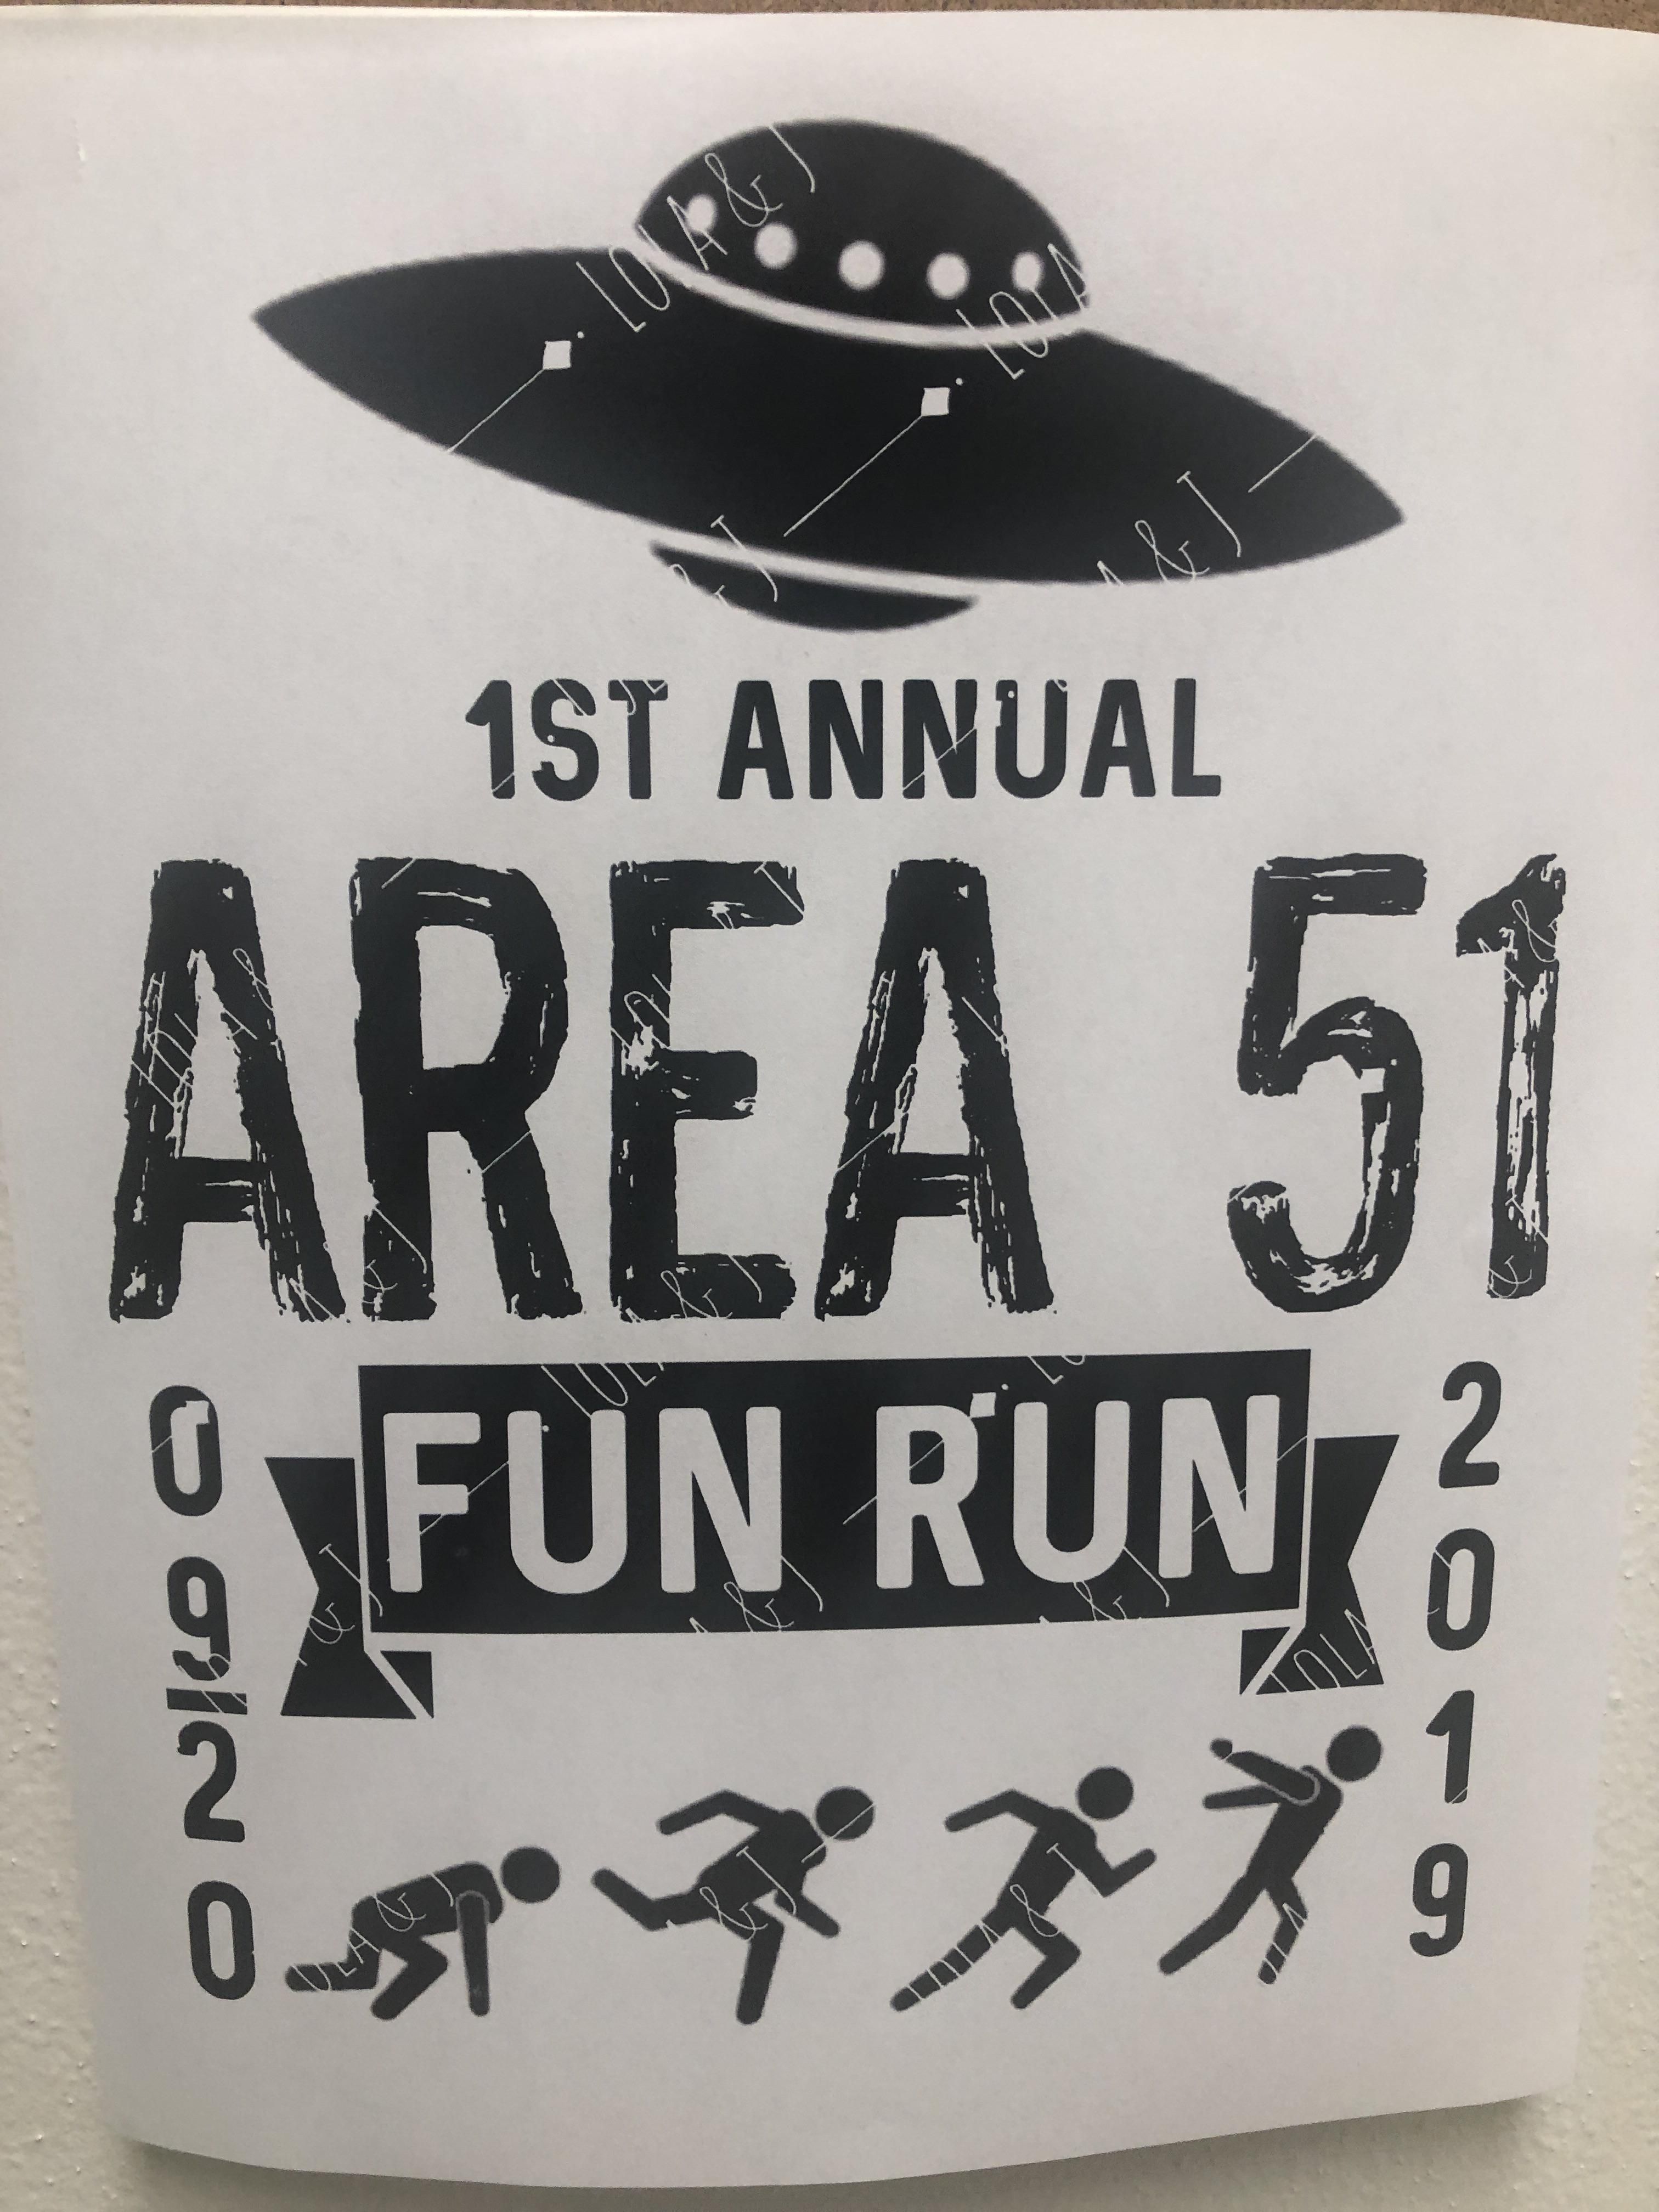 Found this flyer for a fun run this weekend.